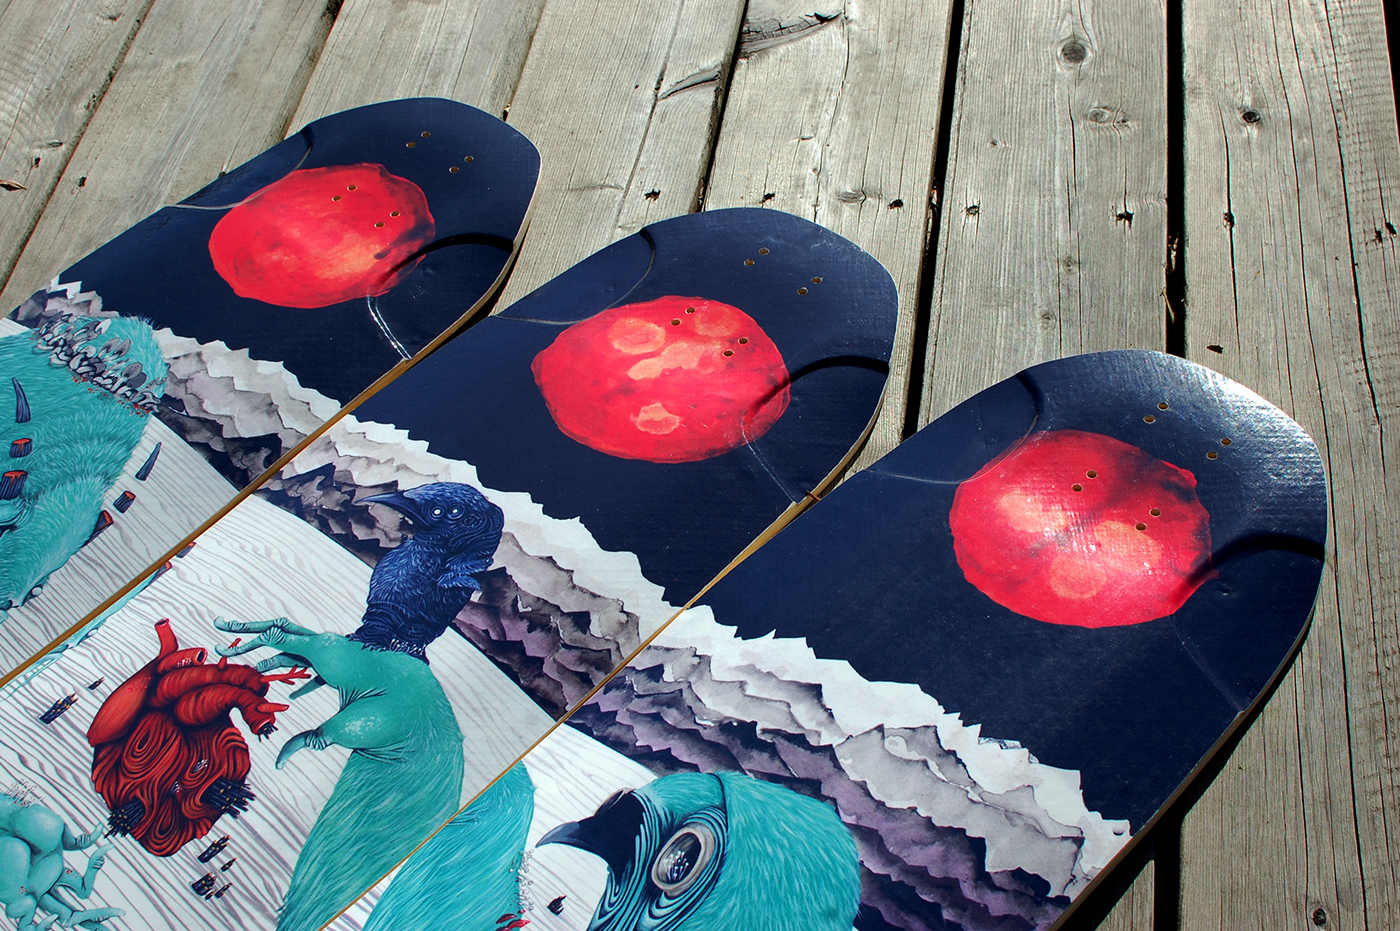 Rayne LONGBOARD rayne longboard longboard artwork longboard graphic skate art turquoise and red blood moon